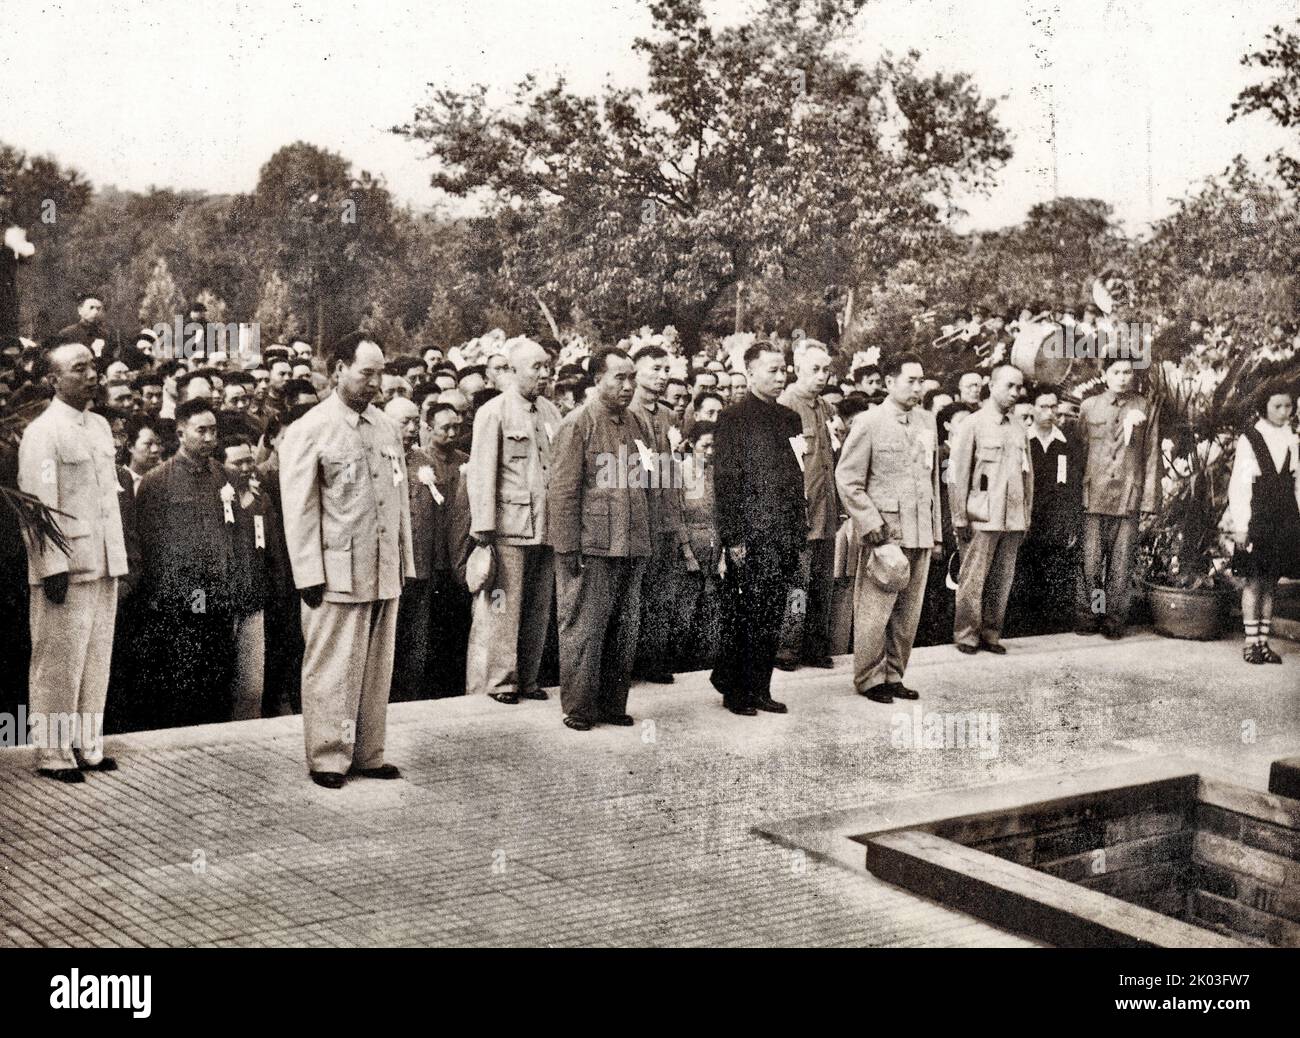 On July 18, Ren Bishi's burial ceremony was held in Beijing Babaoshan Cemetery. After the coffin was buried, Liu Shaoqi laid a wreath on behalf of the Central Committee of the Communist Party of China. The band played the Internationale Ren Bishi was a military and political leader in the early Chinese Communist Party. In the early 1930s, Stock Photo